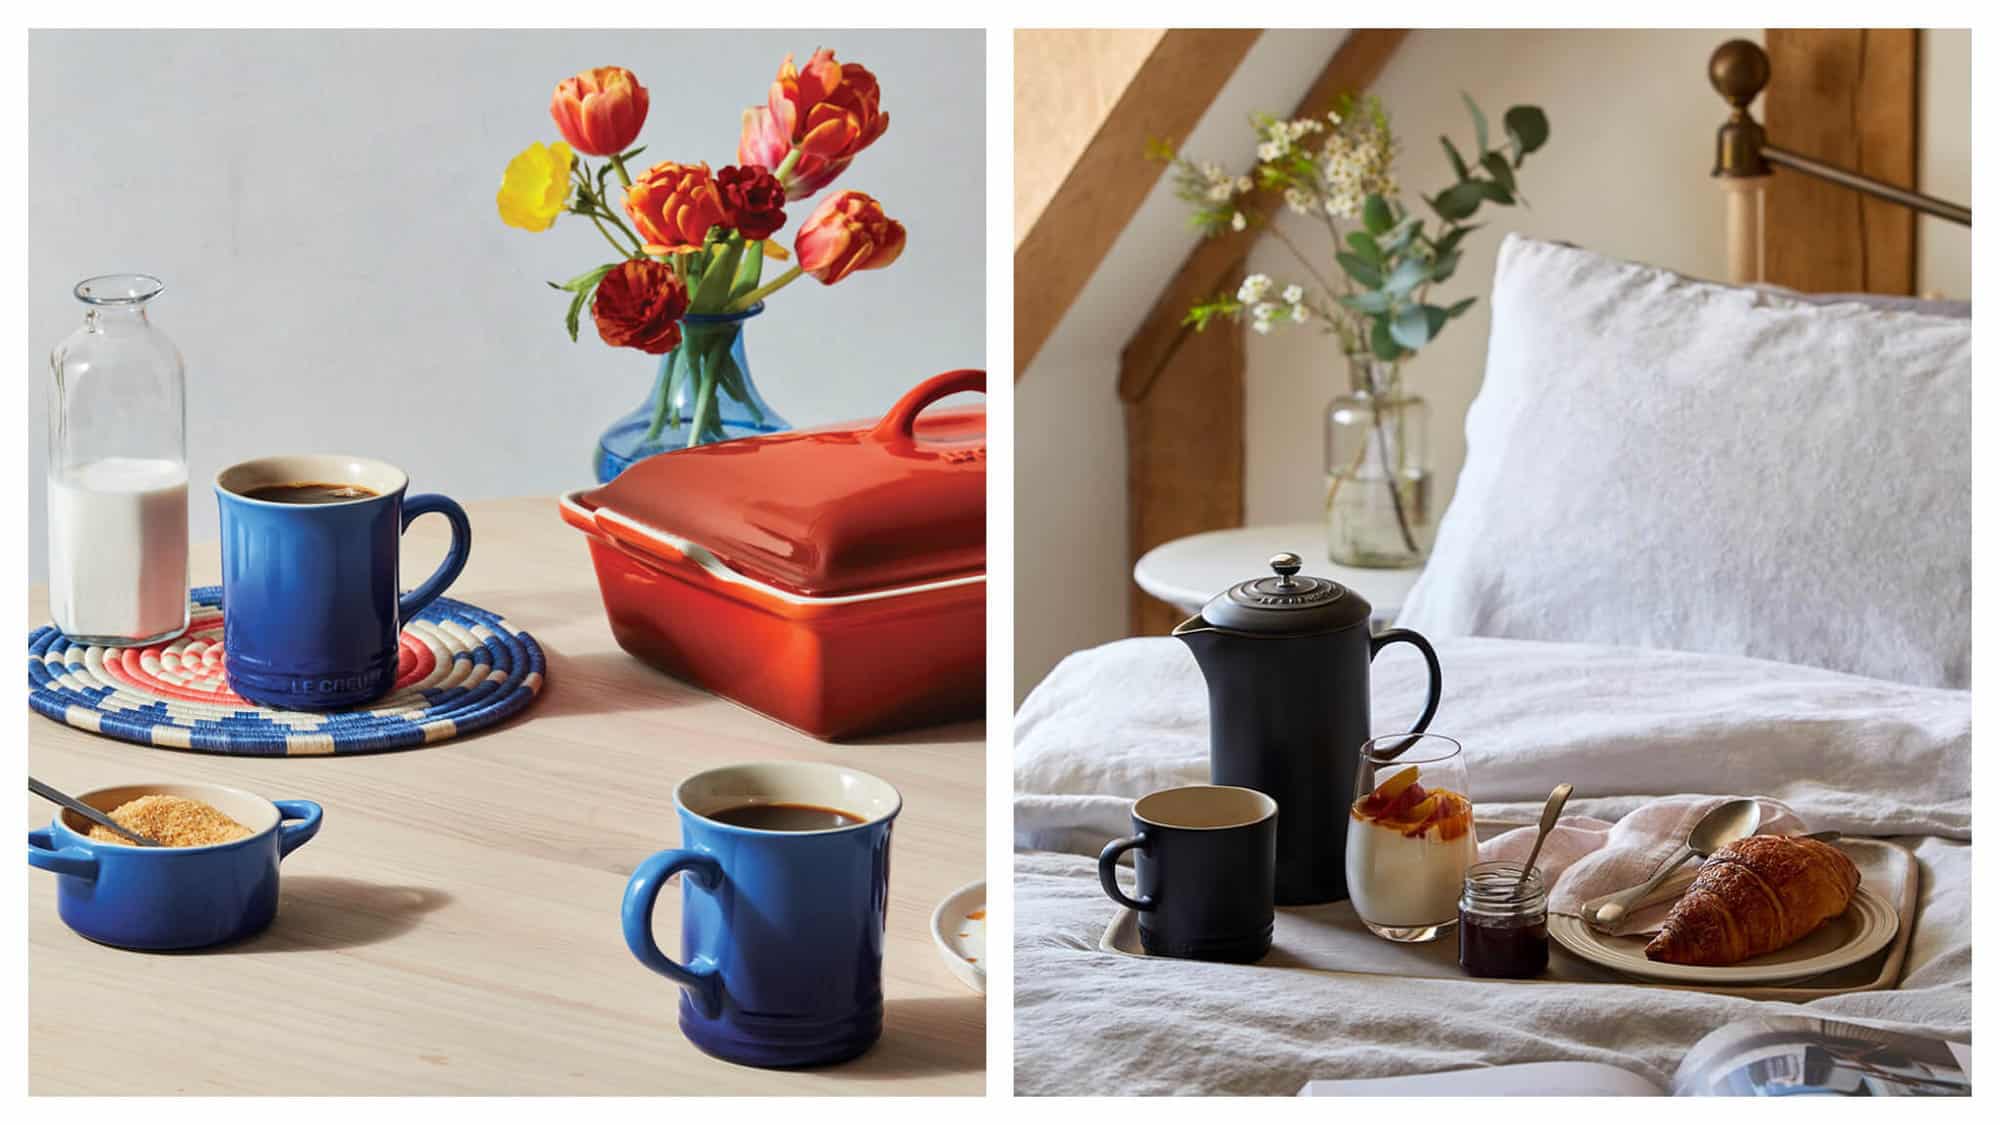 Left: two blue mugs, a sugar bowl, and a red casserole dish by Le Creuset sitting on a table with a glass bottle of milk and a vase of flowers. Right: a black ceramic French press and mug by Le Creuset sitting on a breakfast tray with a croissant, jam and yoghurt on a bed. 